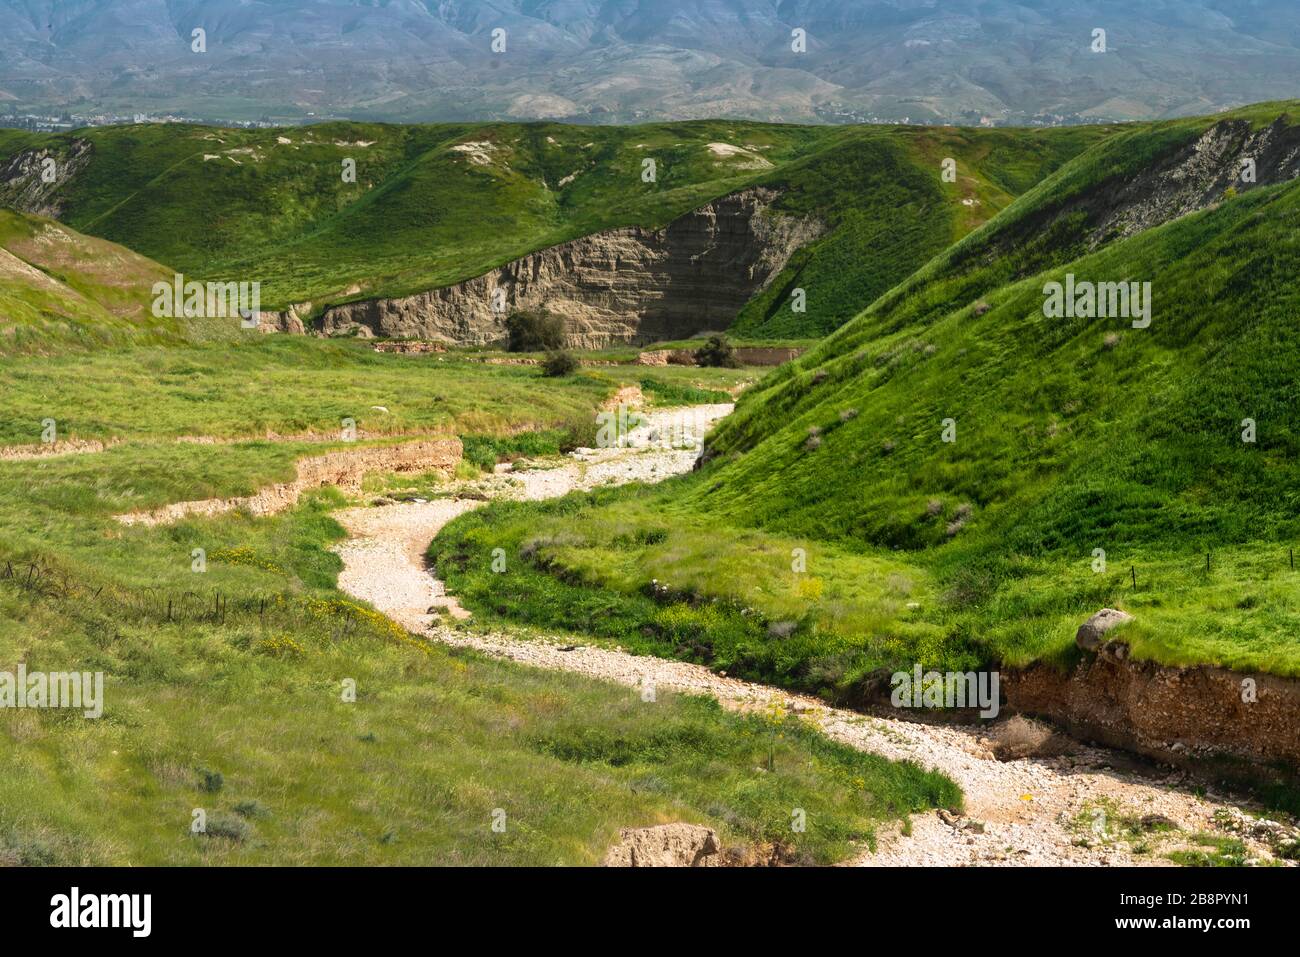 Green hills of the Jordan Valley in spring, Israel, Middle East. Stock Photo